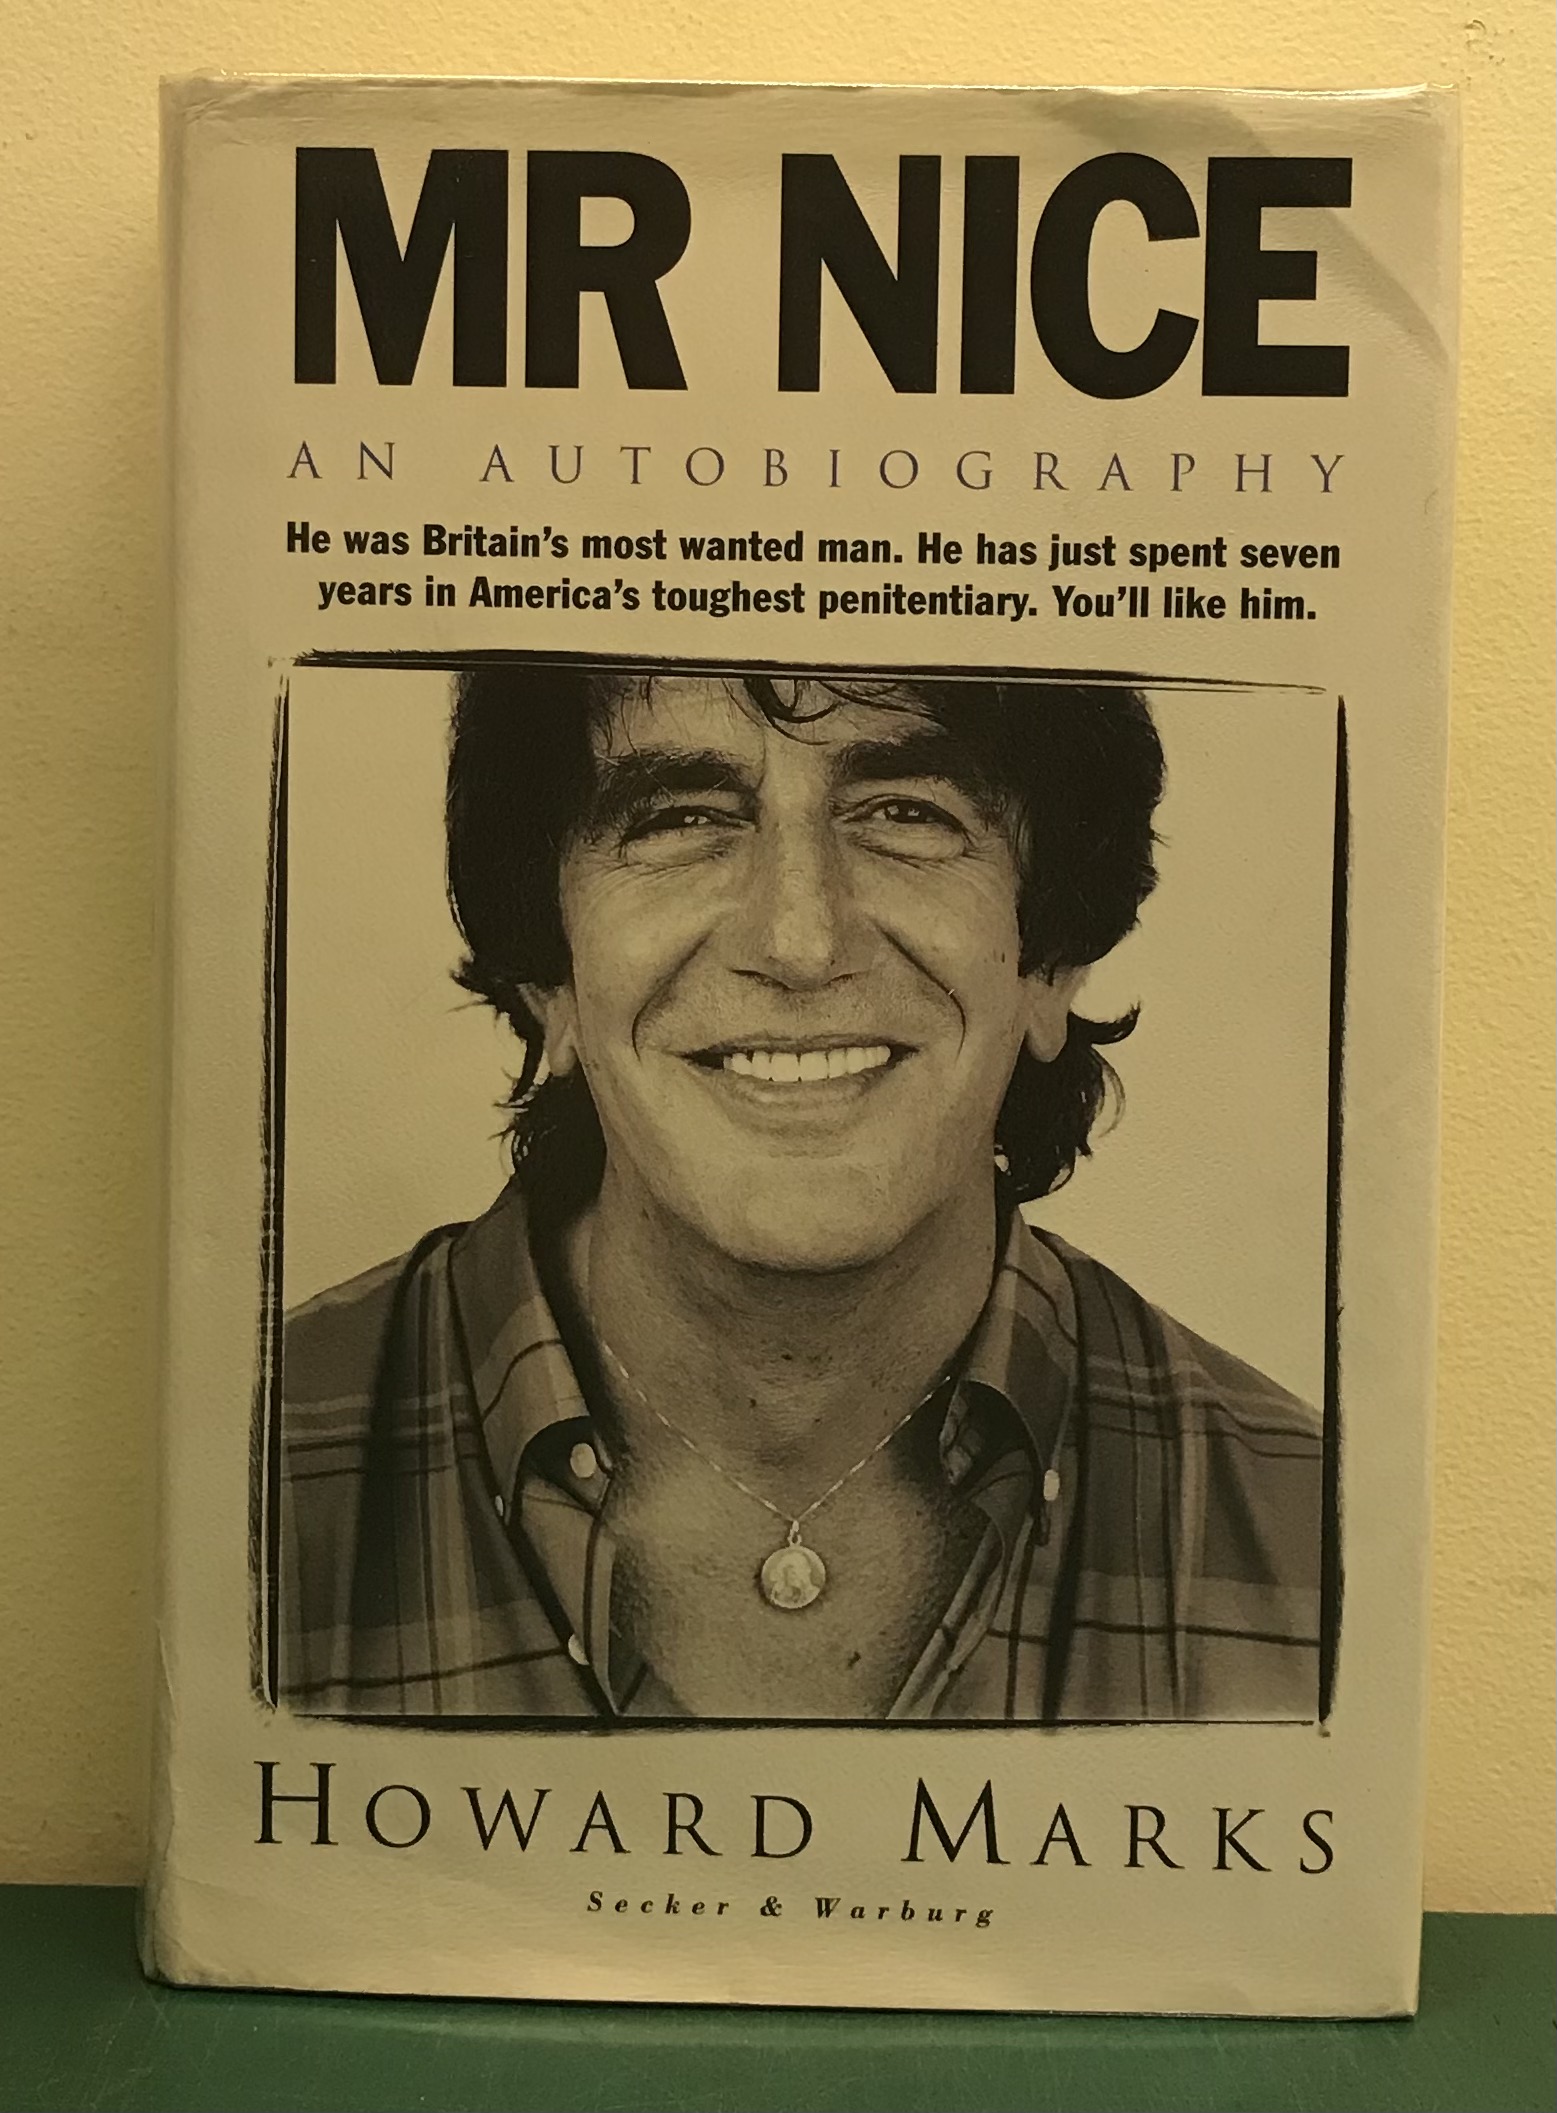 Mr Nice - An Autobiography (signed copy)